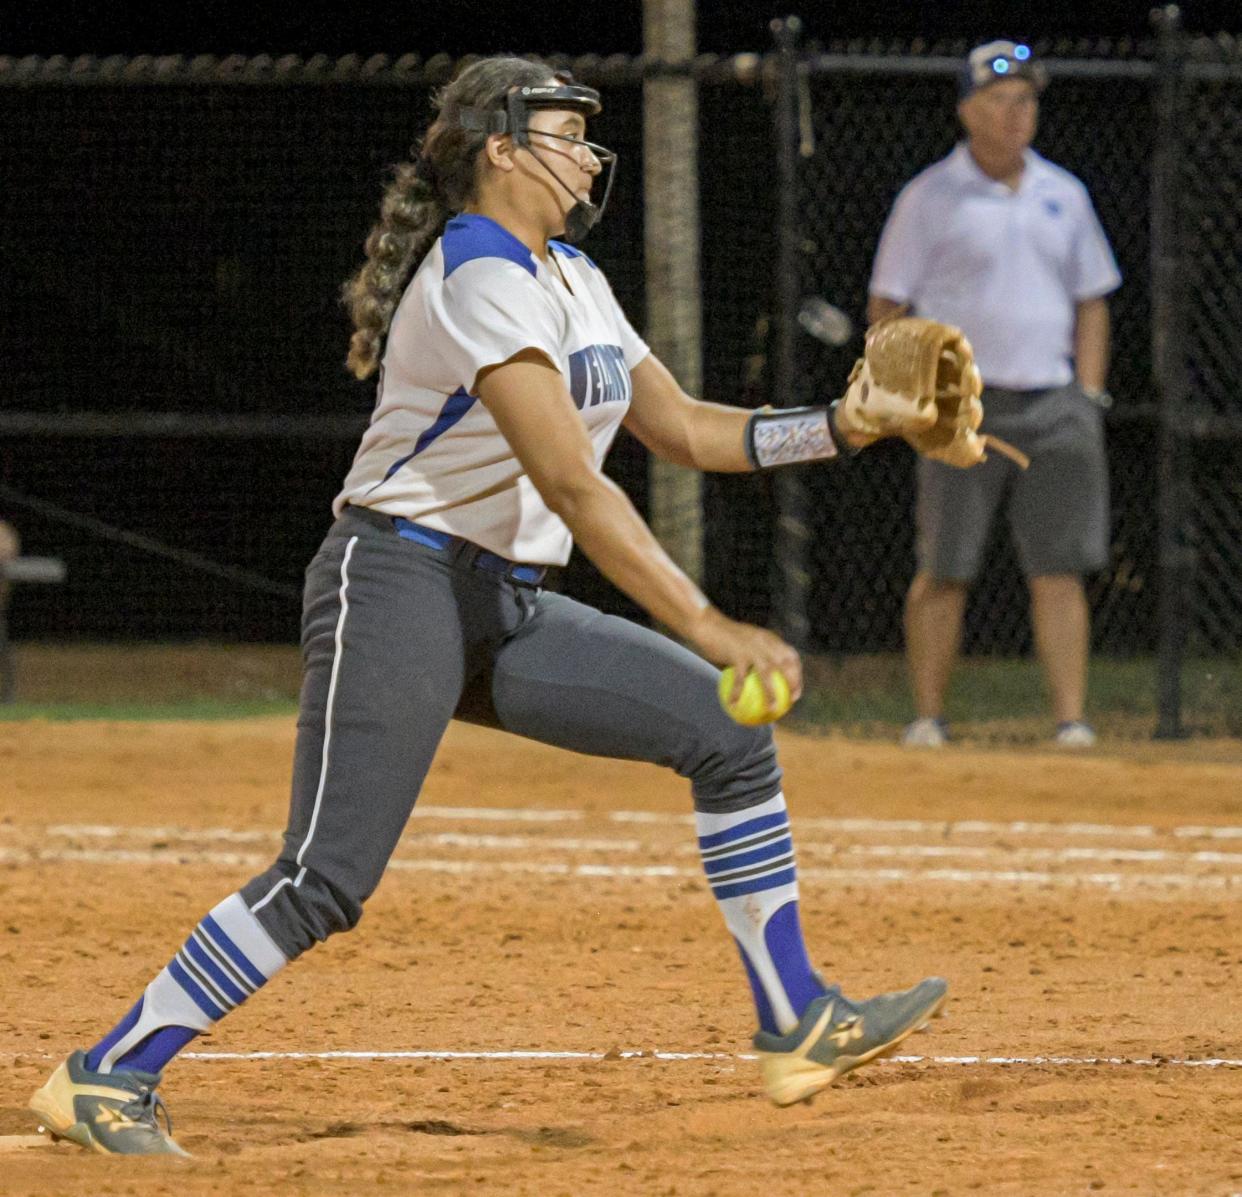 Wellington's Victoria Payne (18) takes over pitching at the Class 7A state semifinal game between Wellington High School and (Tampa) Plant High School at Legends Way Ball Fields in Clermont on Friday, May 26, 2023. [PAUL RYAN / CORRESPONDENT]